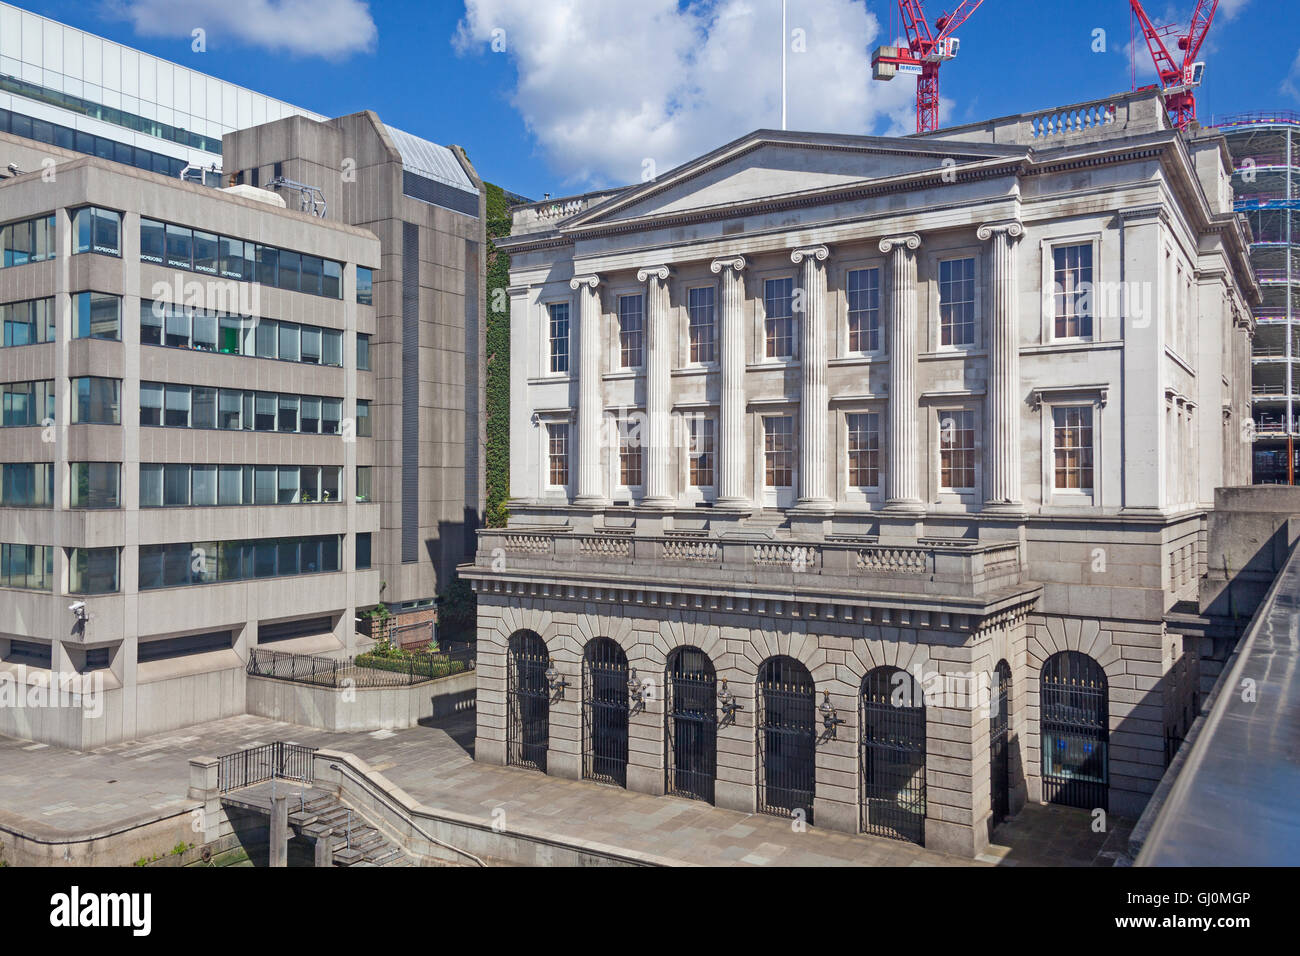 City of London   Fishmongers' Hall of 1834 overlooking the Thames, viewed from London Bridge Stock Photo